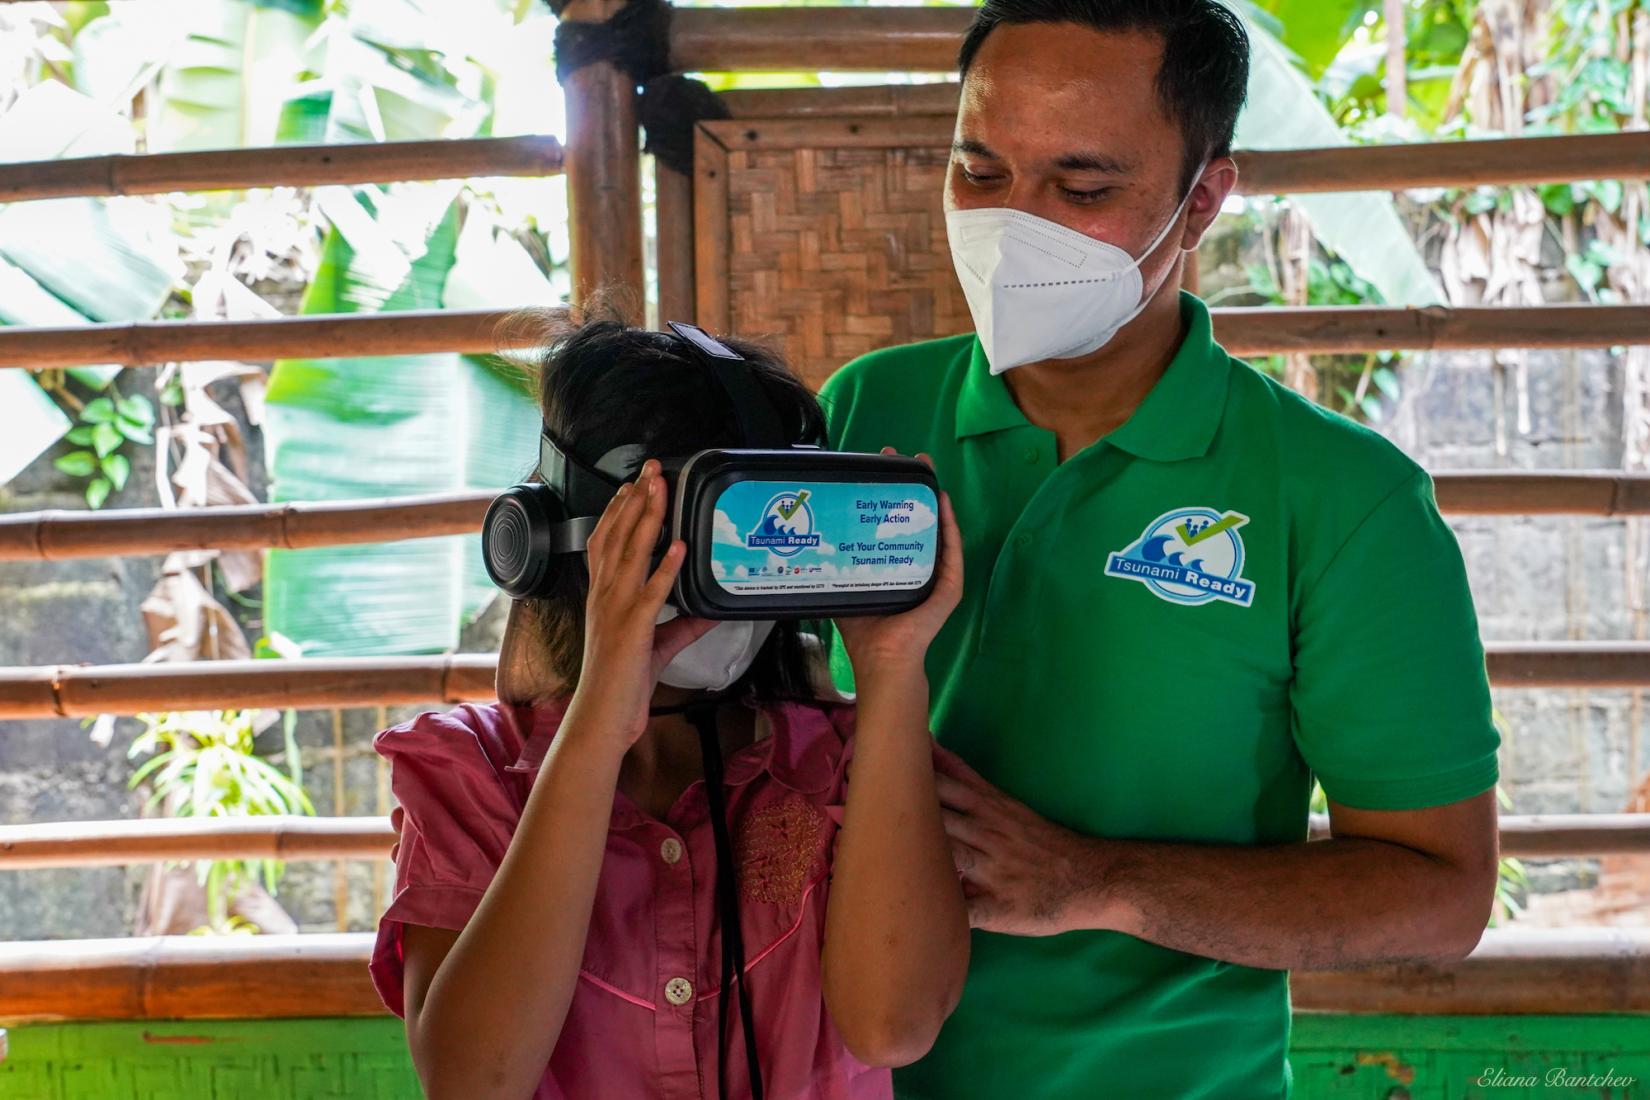 A student watches a UNESCO virtual reality simulation designed to promote tsunami readiness at Sekolah Alam Matoa in West Java, on June 16, 2022